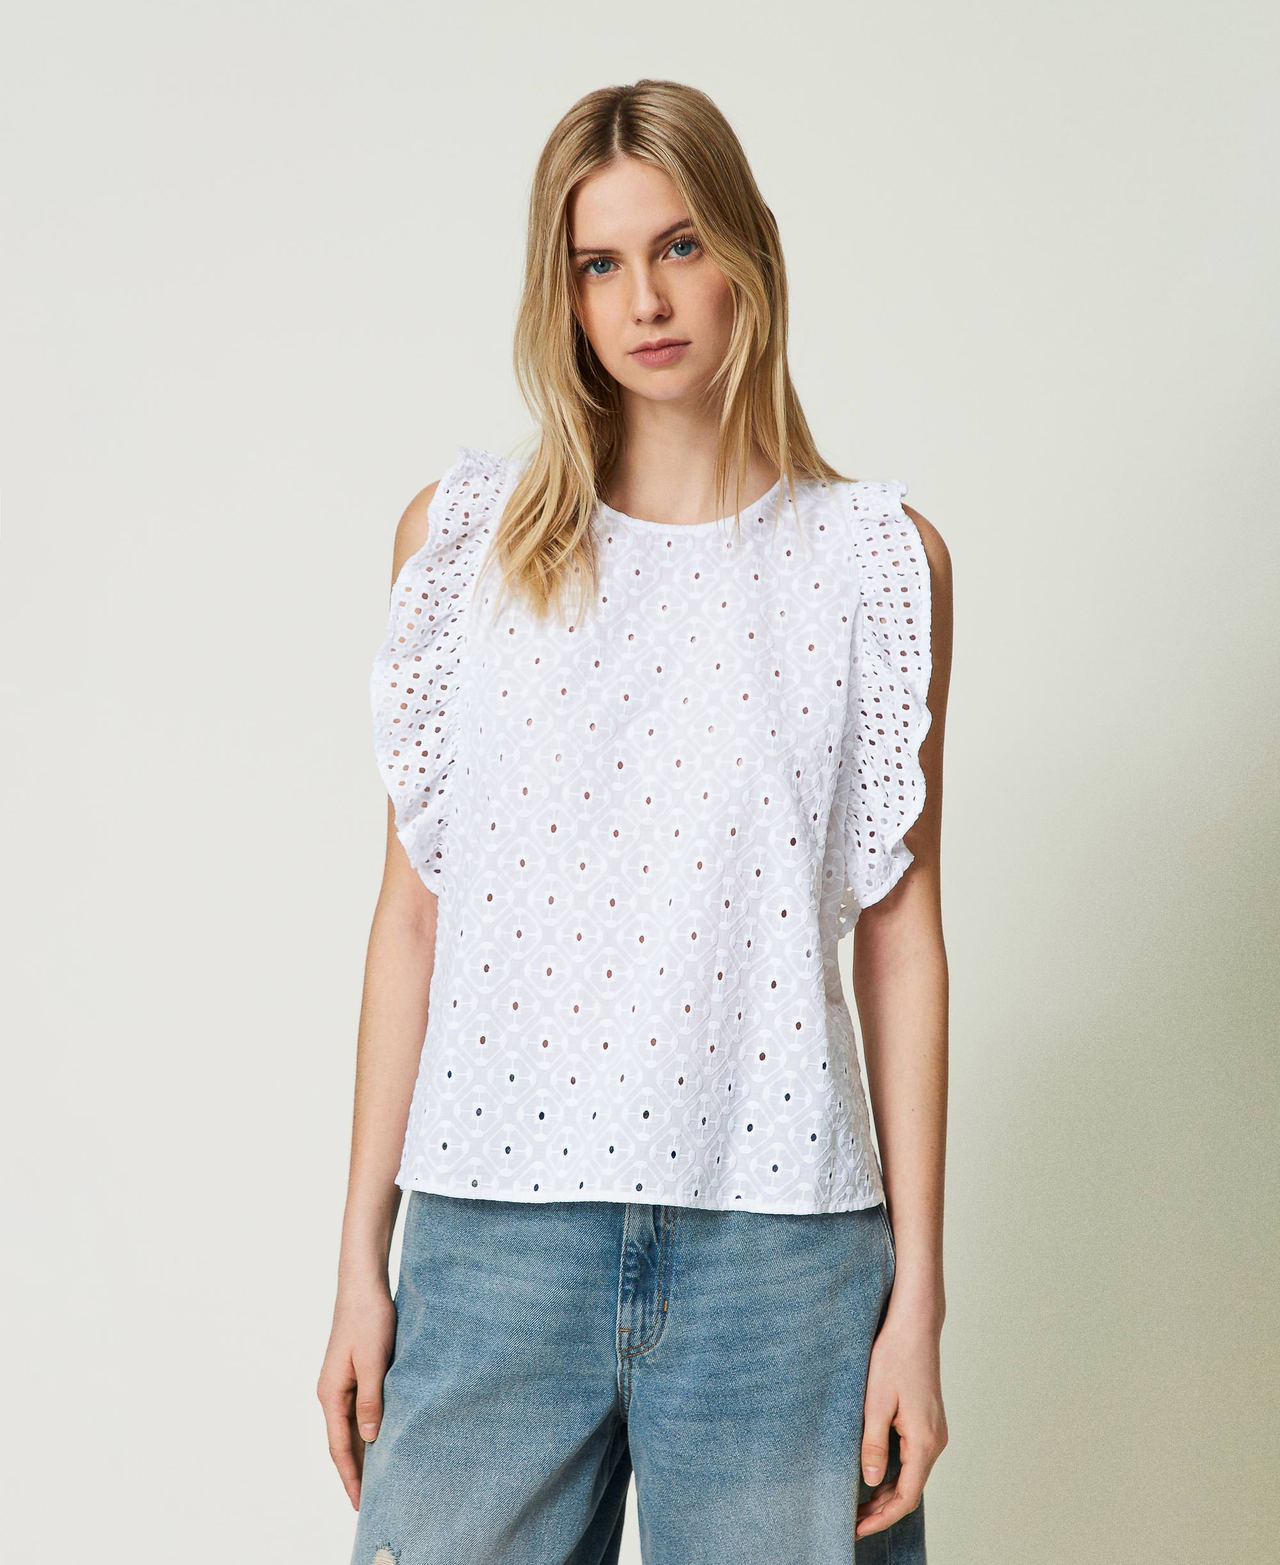 Top en broderie anglaise avec volant Blanc "Papers" Femme 241AT2070-02